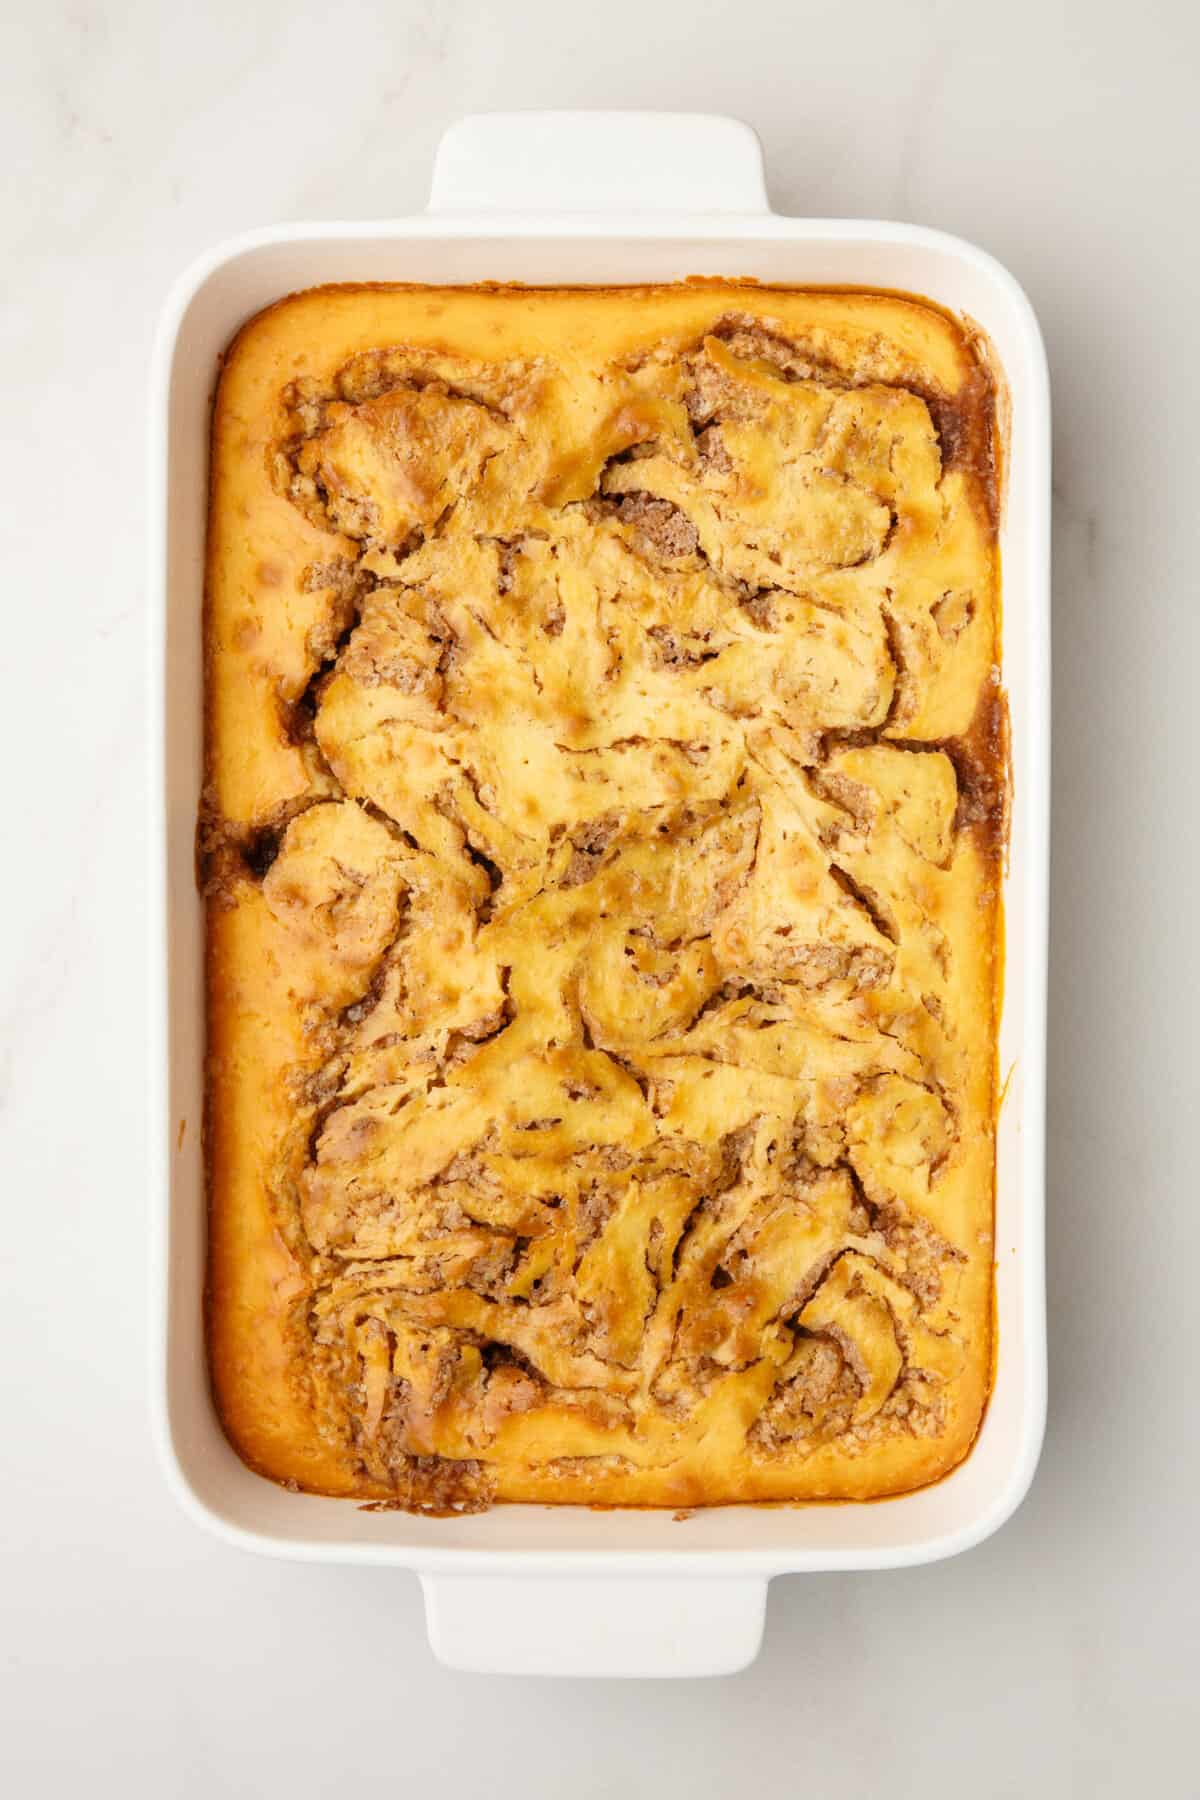 baked cinnamon roll cake sitting in a 9x13 casserole dish